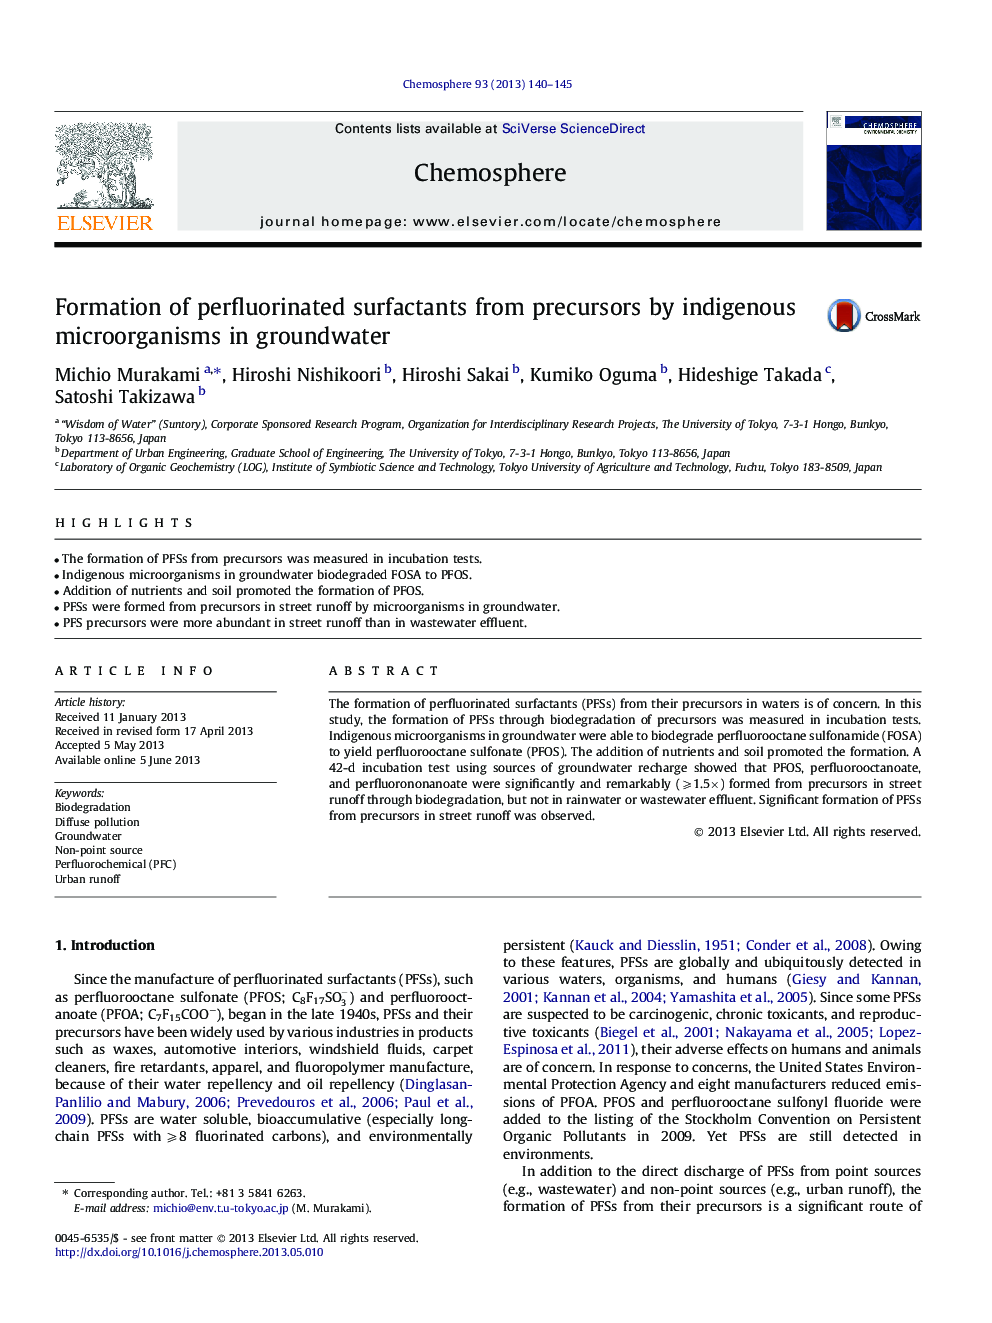 Formation of perfluorinated surfactants from precursors by indigenous microorganisms in groundwater